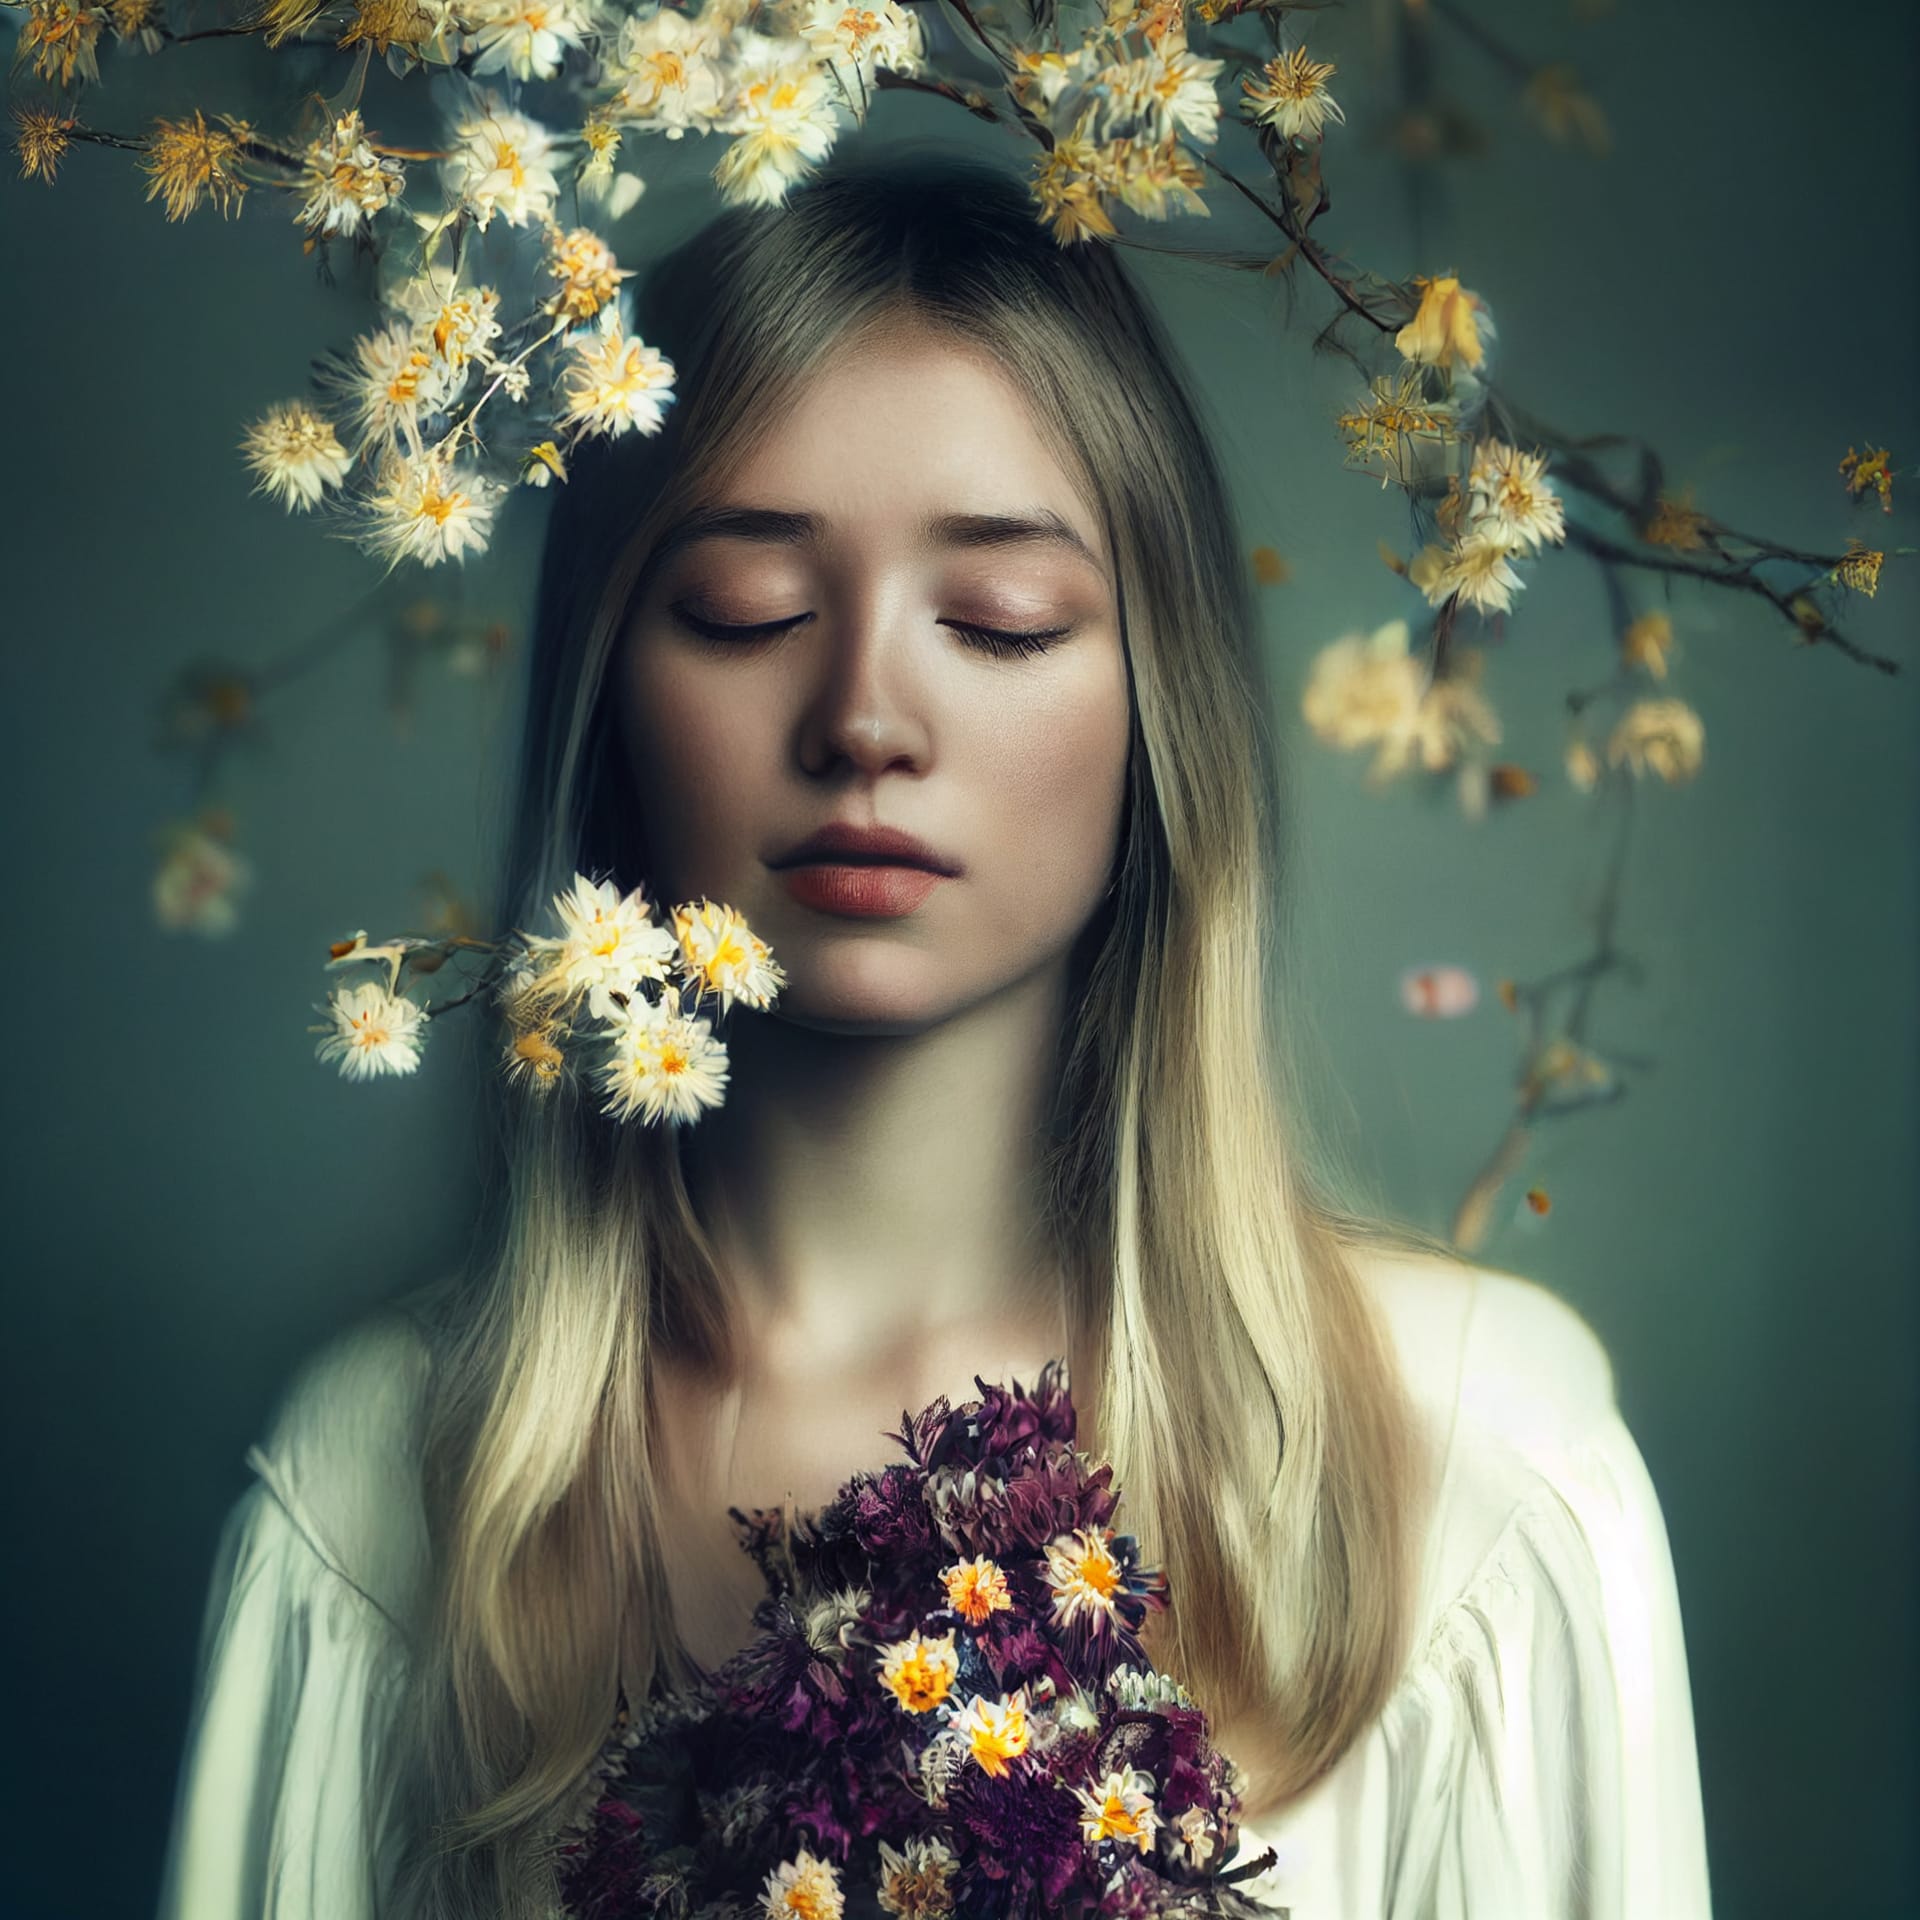 Blonde woman portrait with closed eyes flowers background 3d rendering